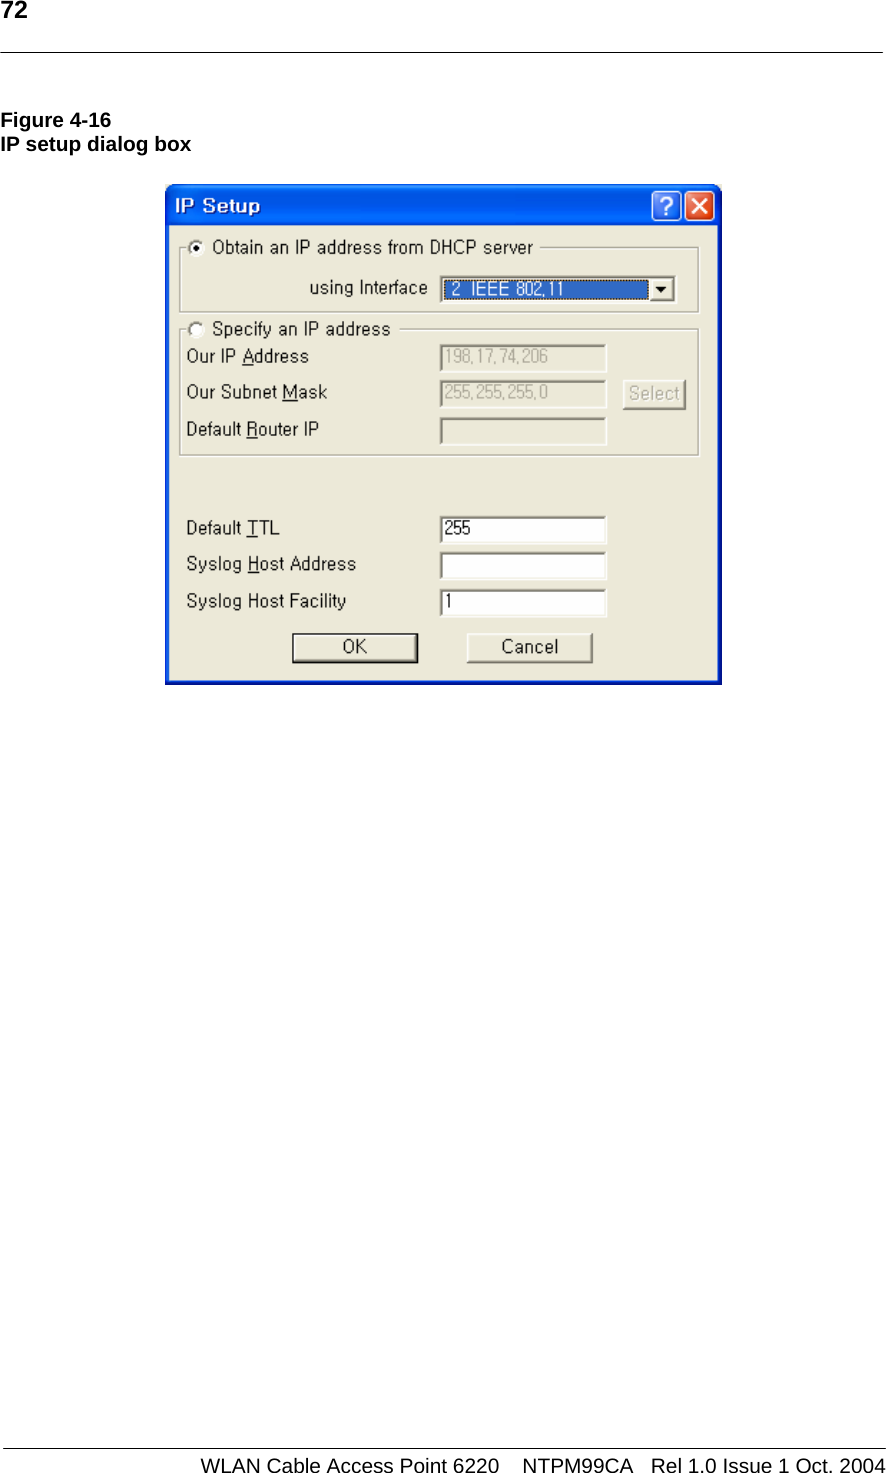   72   Figure 4-16 IP setup dialog box              WLAN Cable Access Point 6220    NTPM99CA   Rel 1.0 Issue 1 Oct. 2004